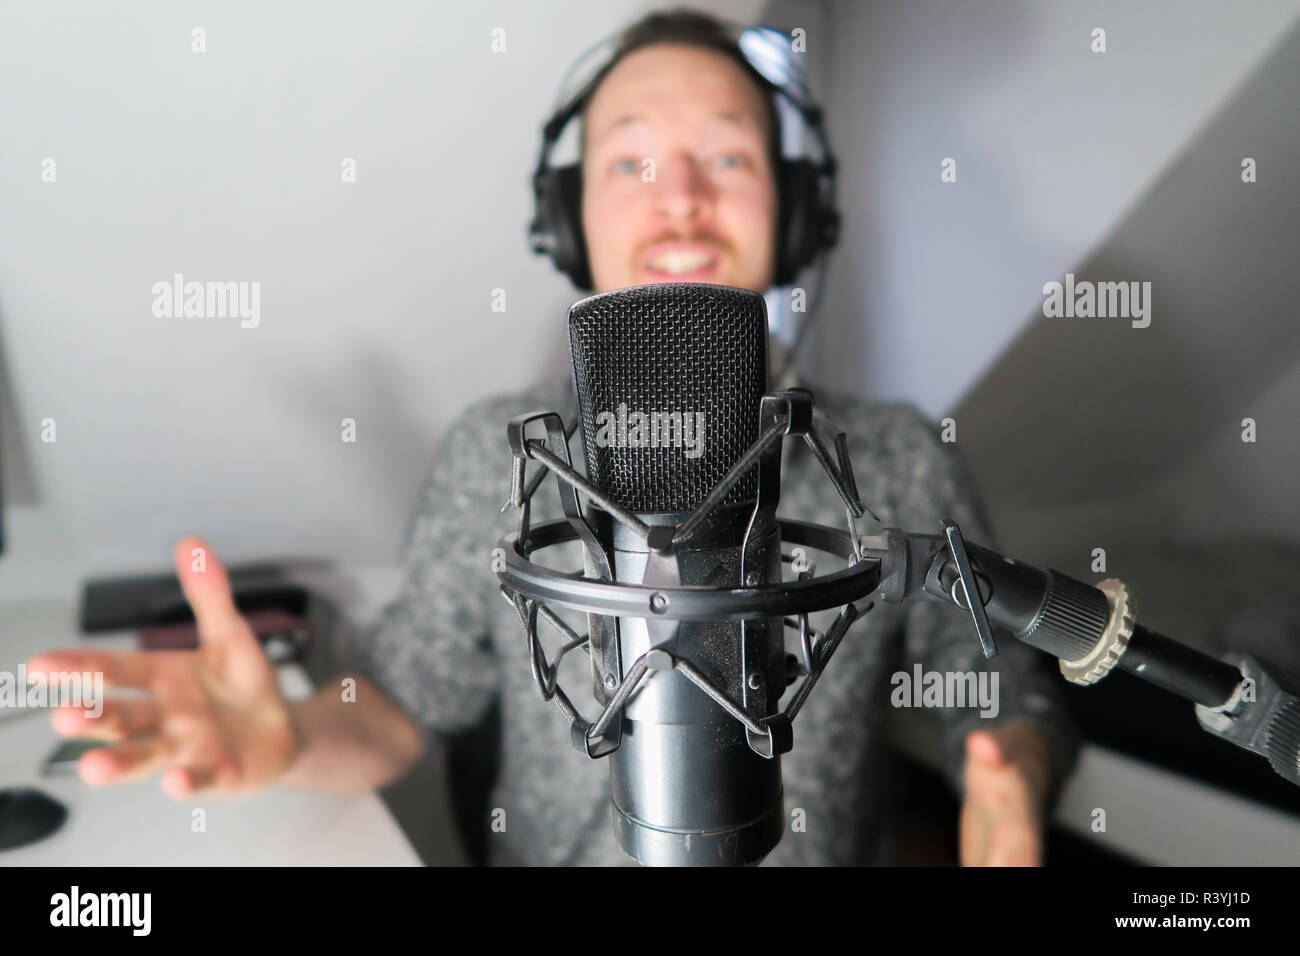 Young male behind condenser microphone radio podcast host voice recording Stock Photo